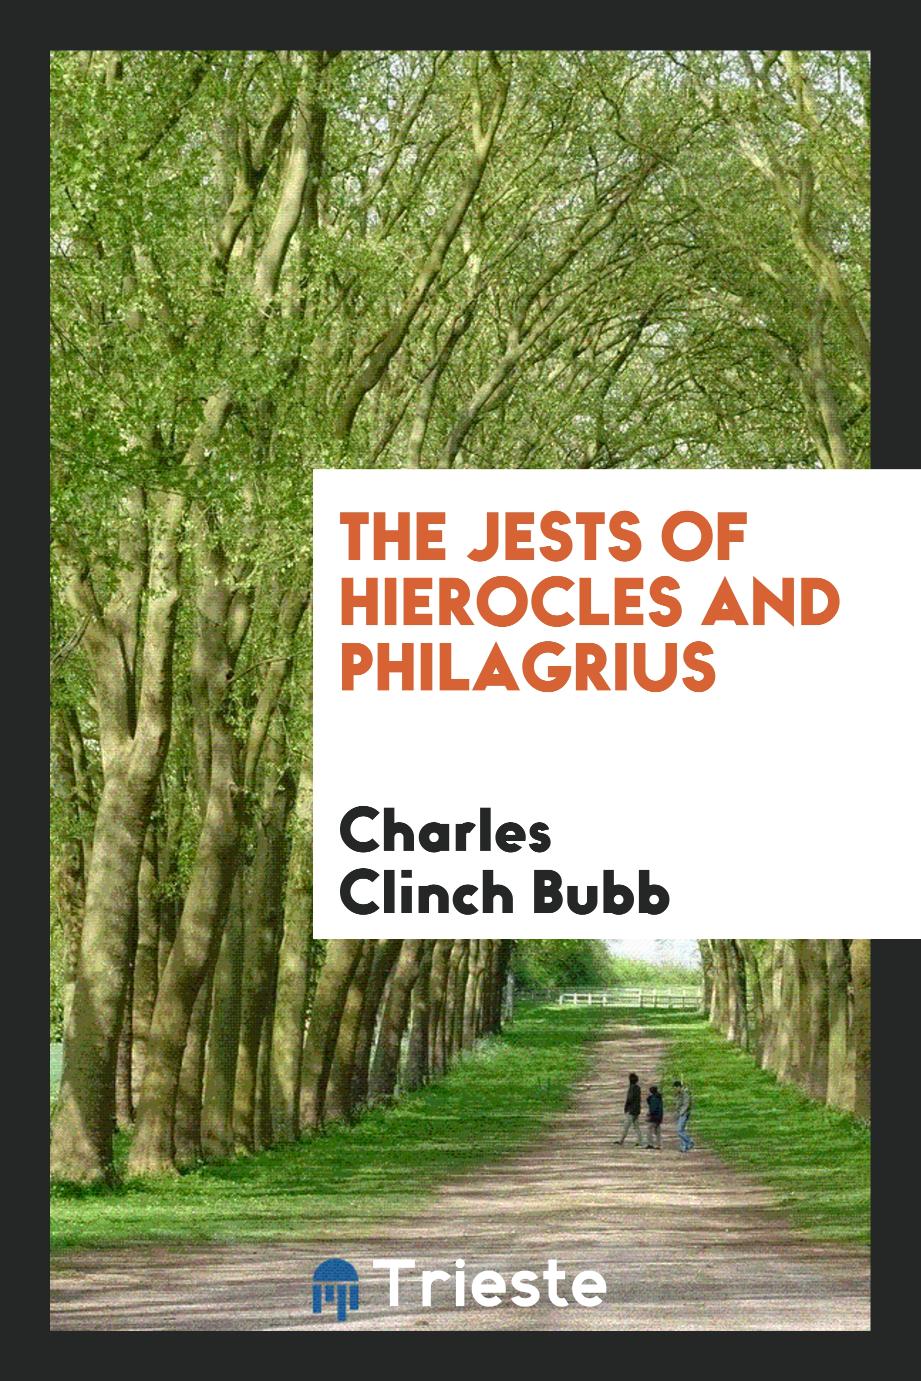 The Jests of Hierocles and Philagrius